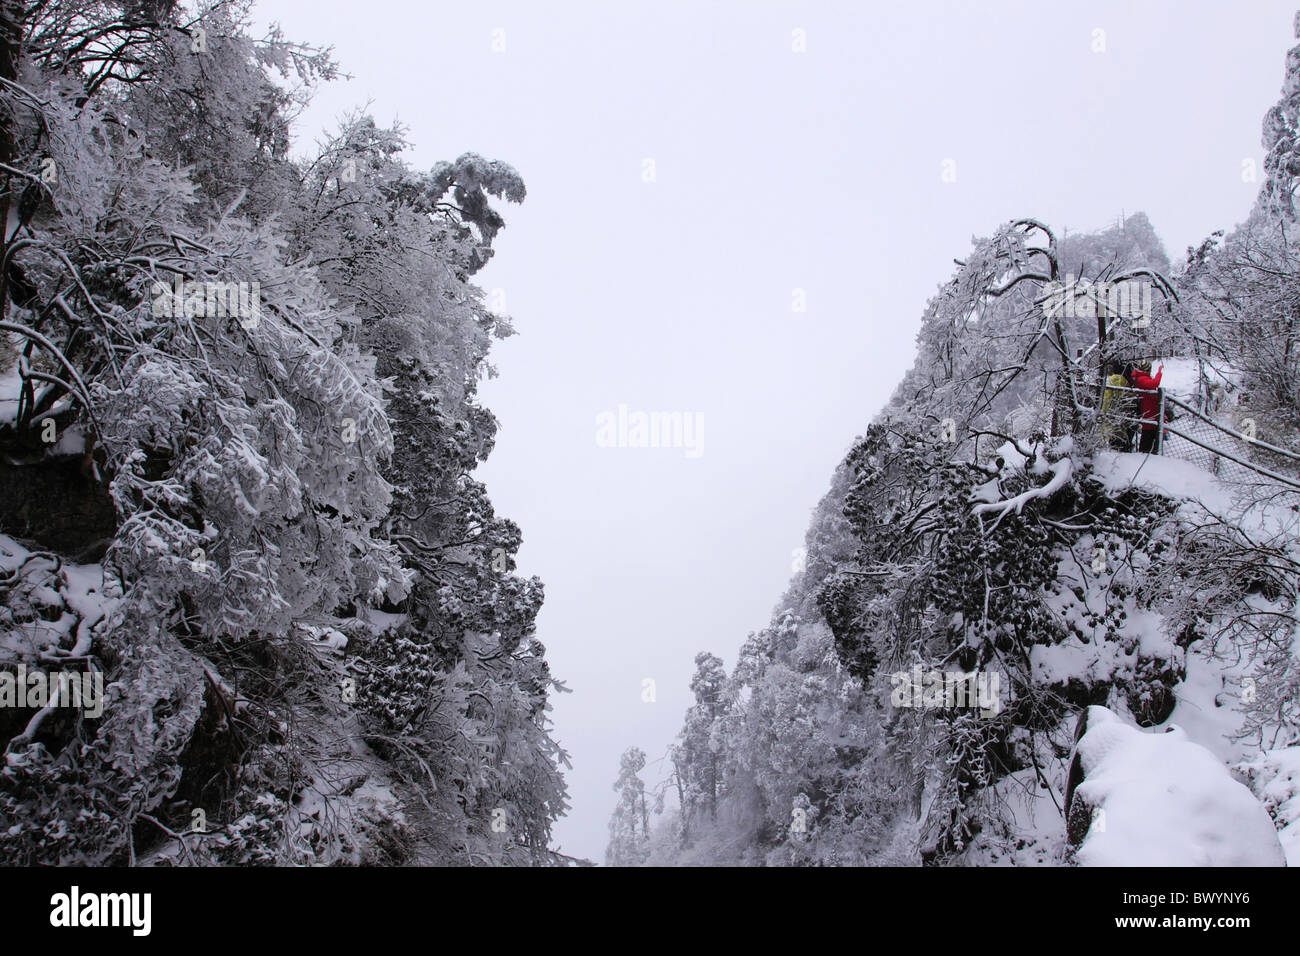 Magnificent Mount Emei in winter, Leshan, Emeishan, Sichuan Province, China Stock Photo